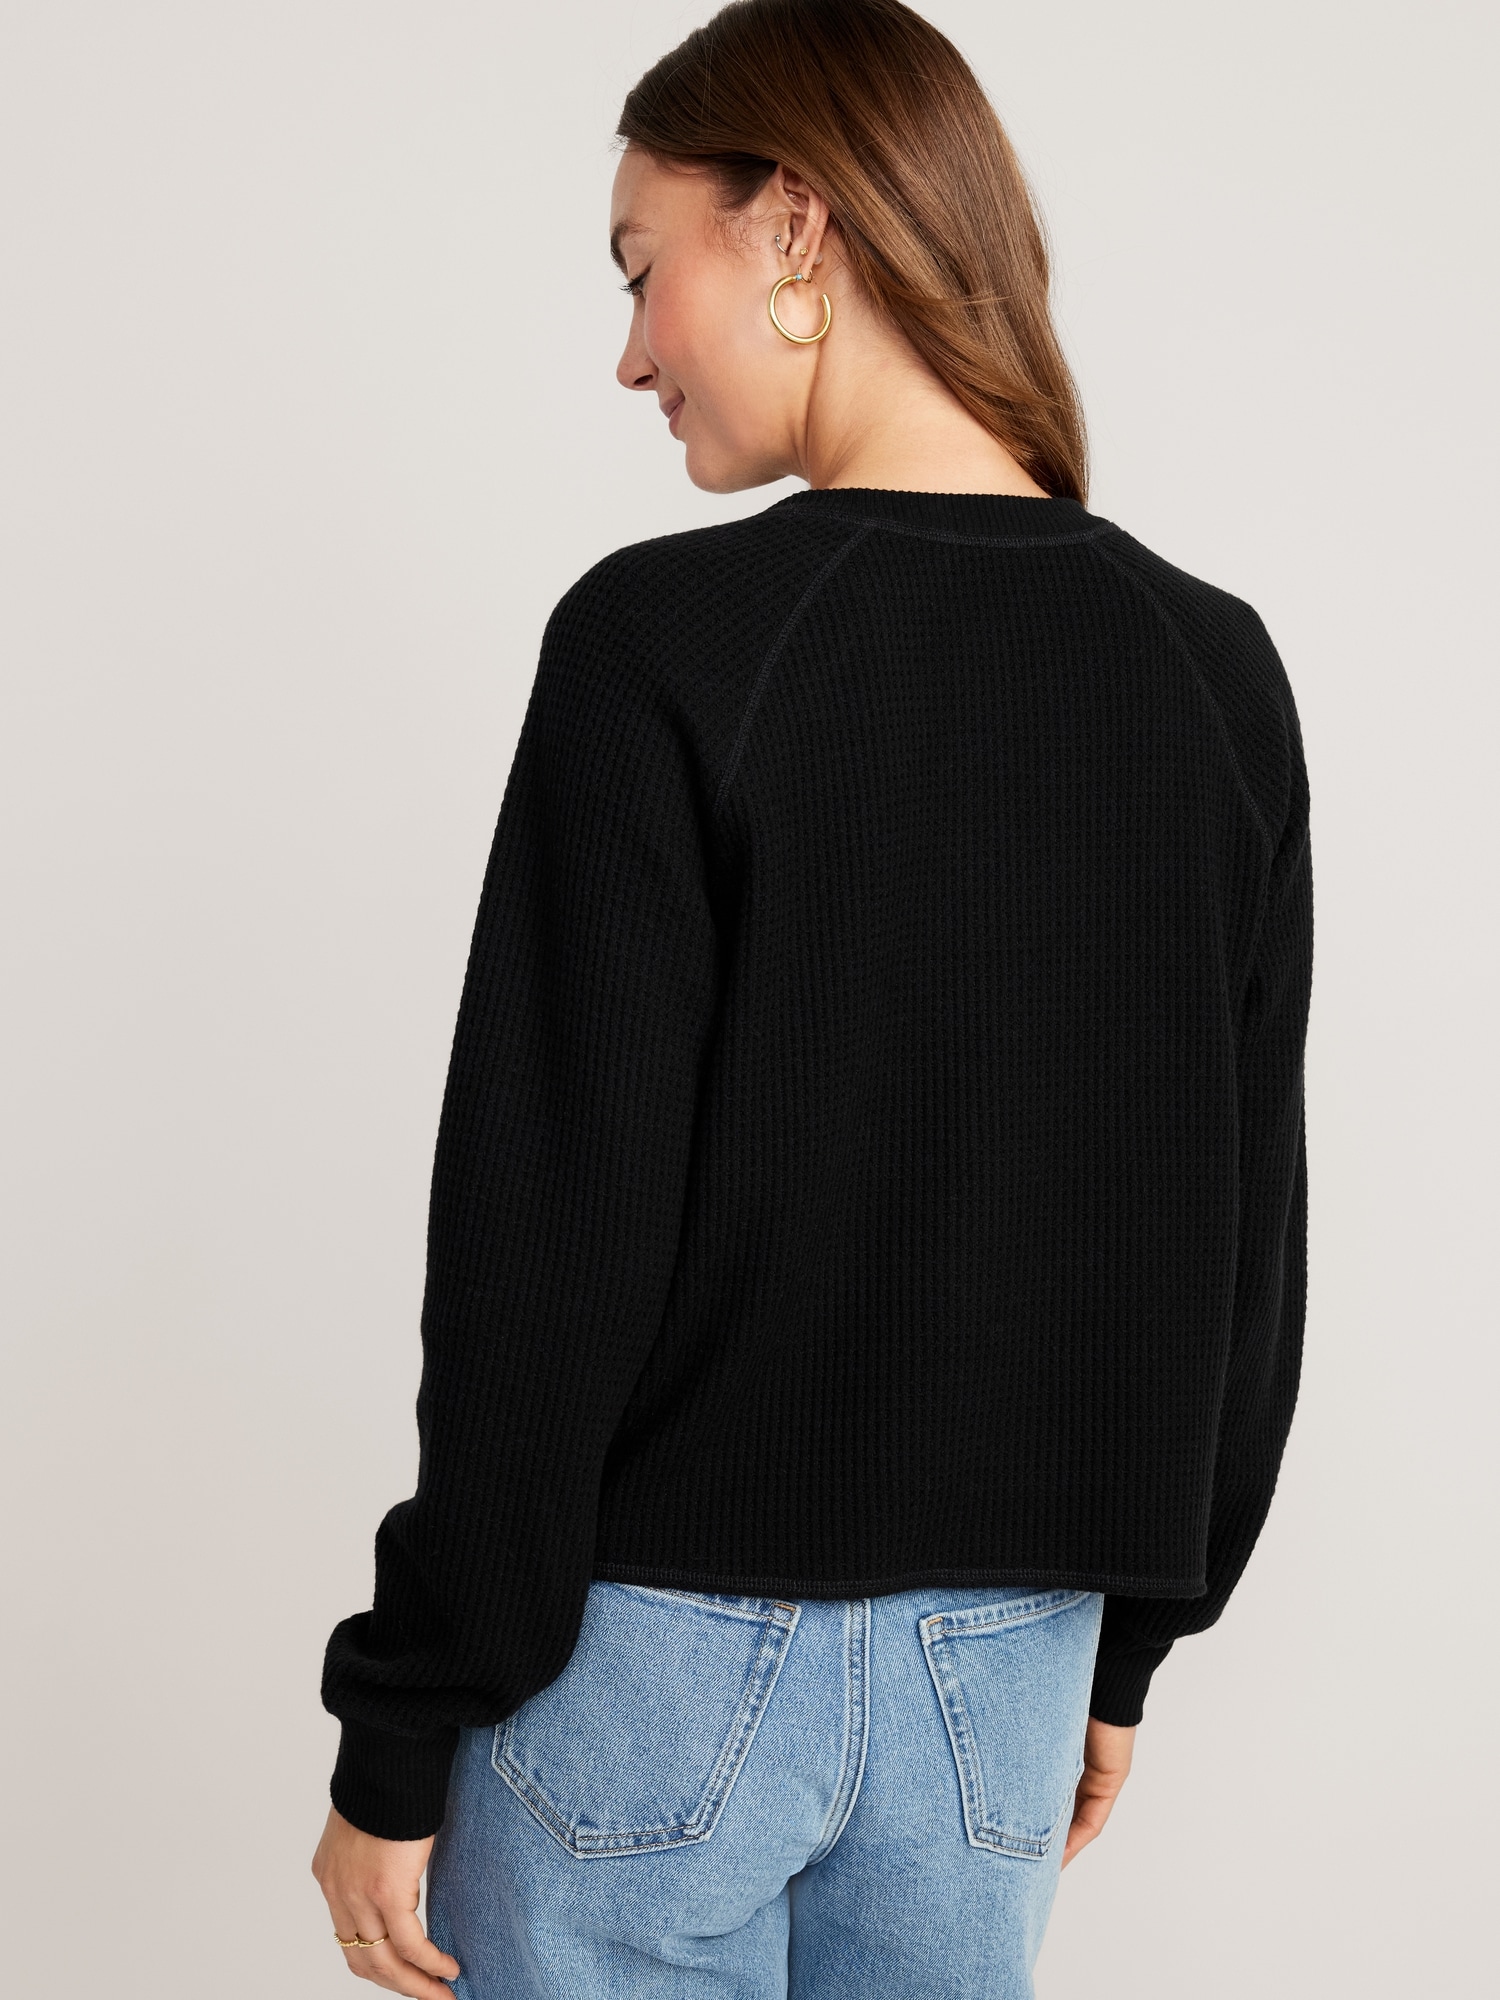 Plush Waffle-Knit Henley Top | Old Navy